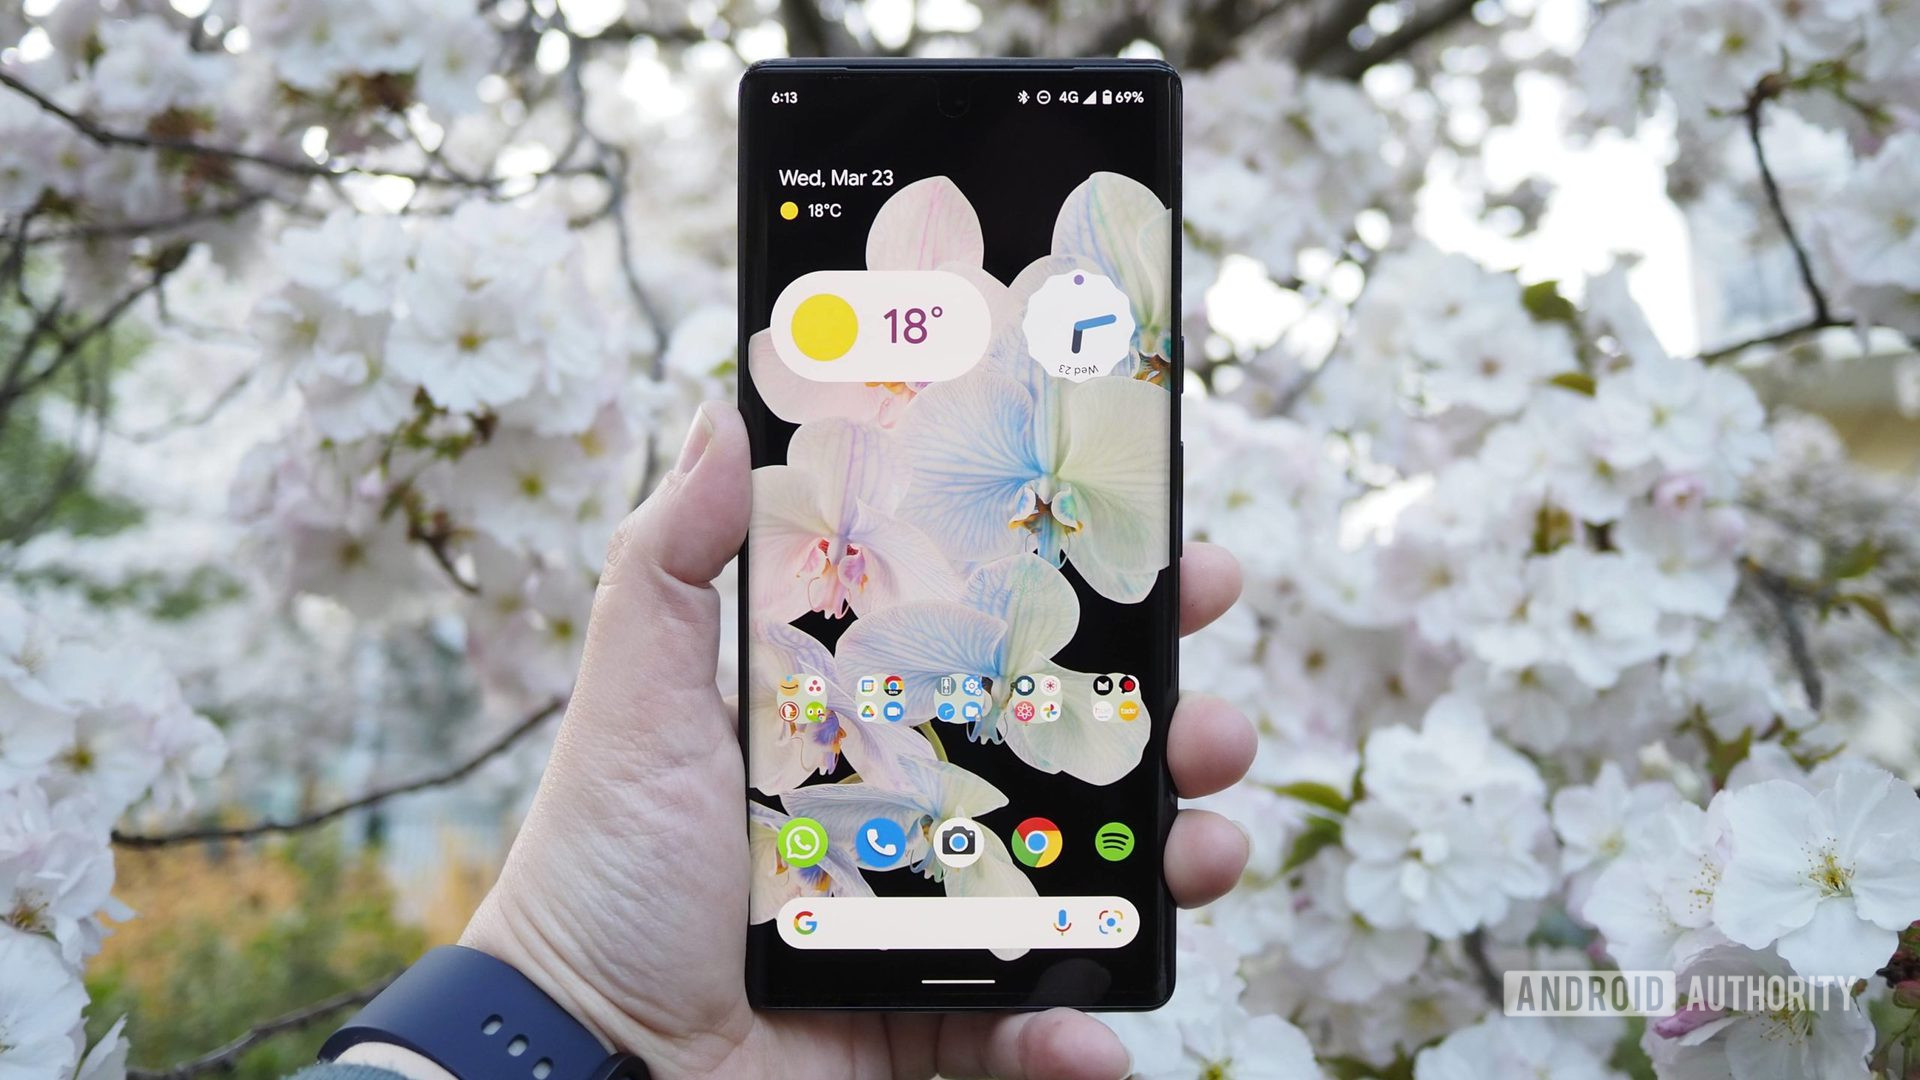 Download Pixel 4 wallpapers, updated Pixel Launcher, and more